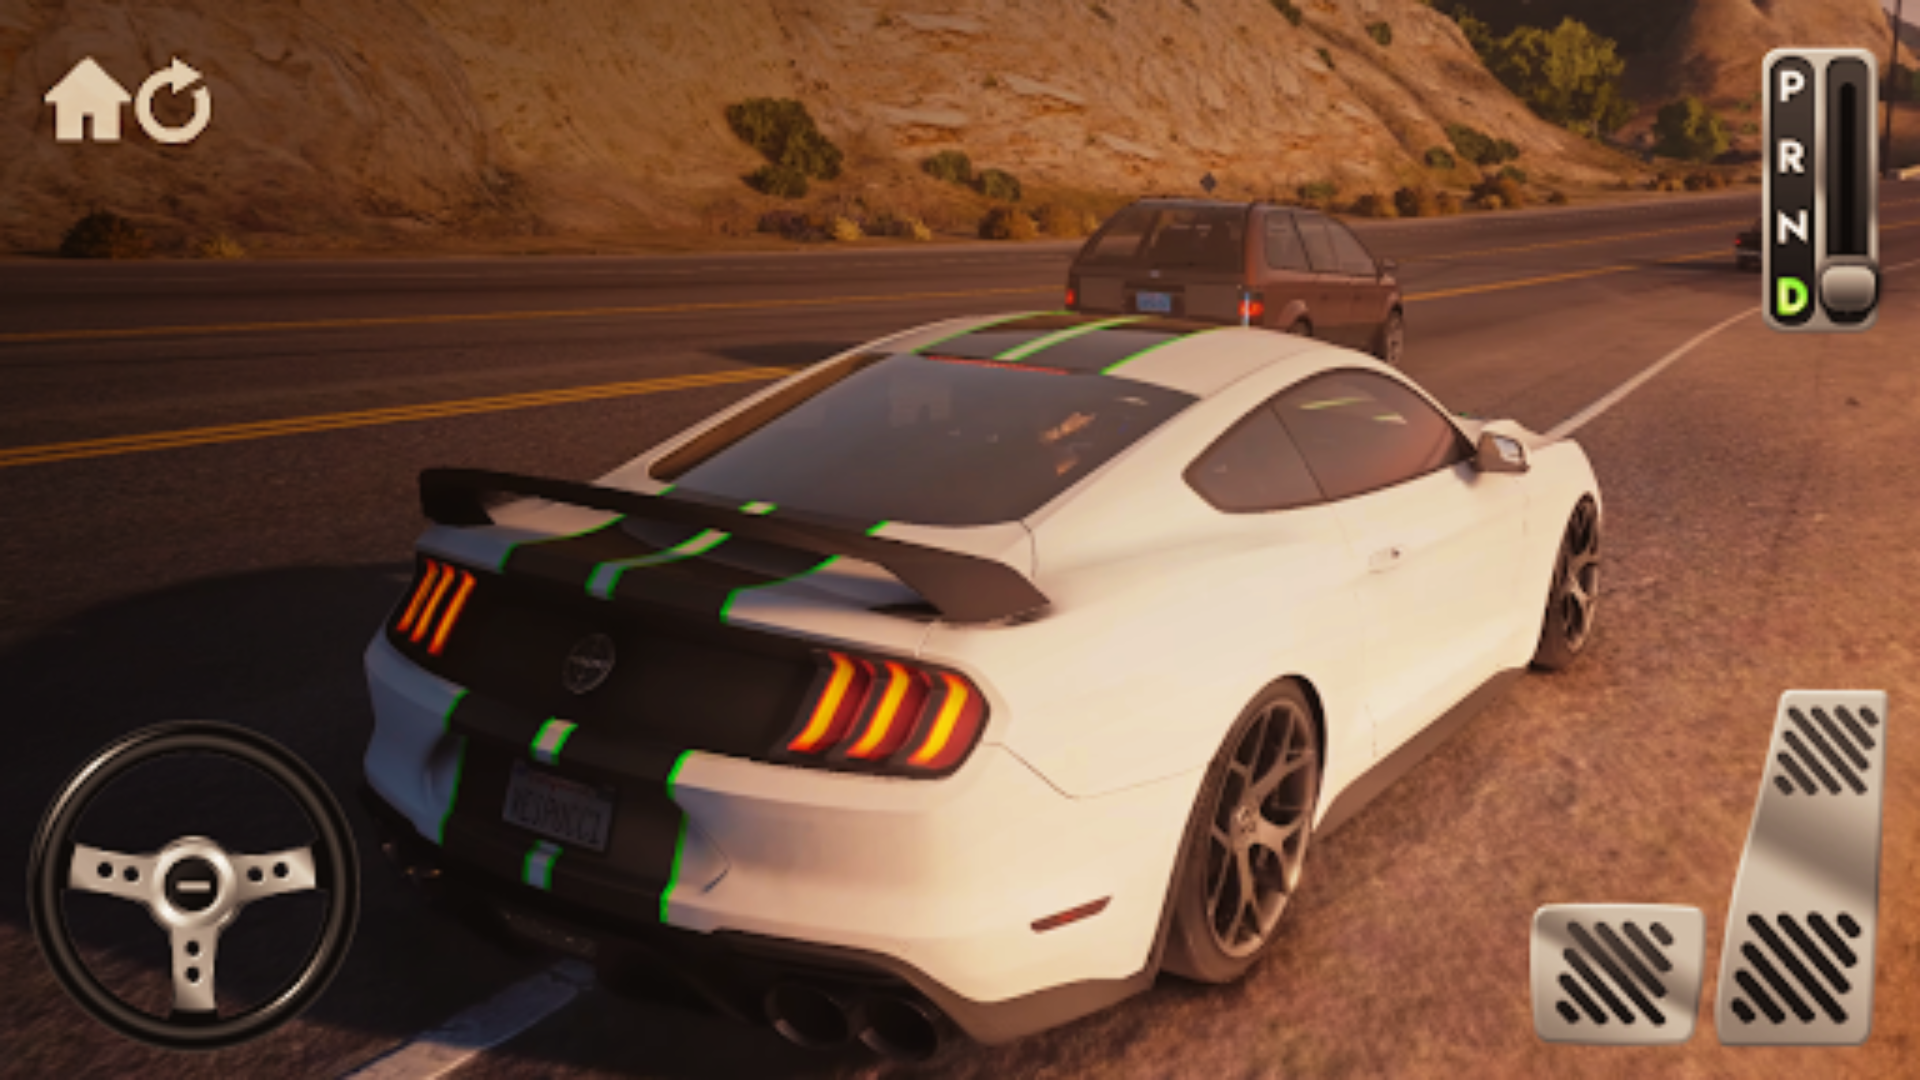 Free Forza Horizon 3 game android 1 APK Download For Android